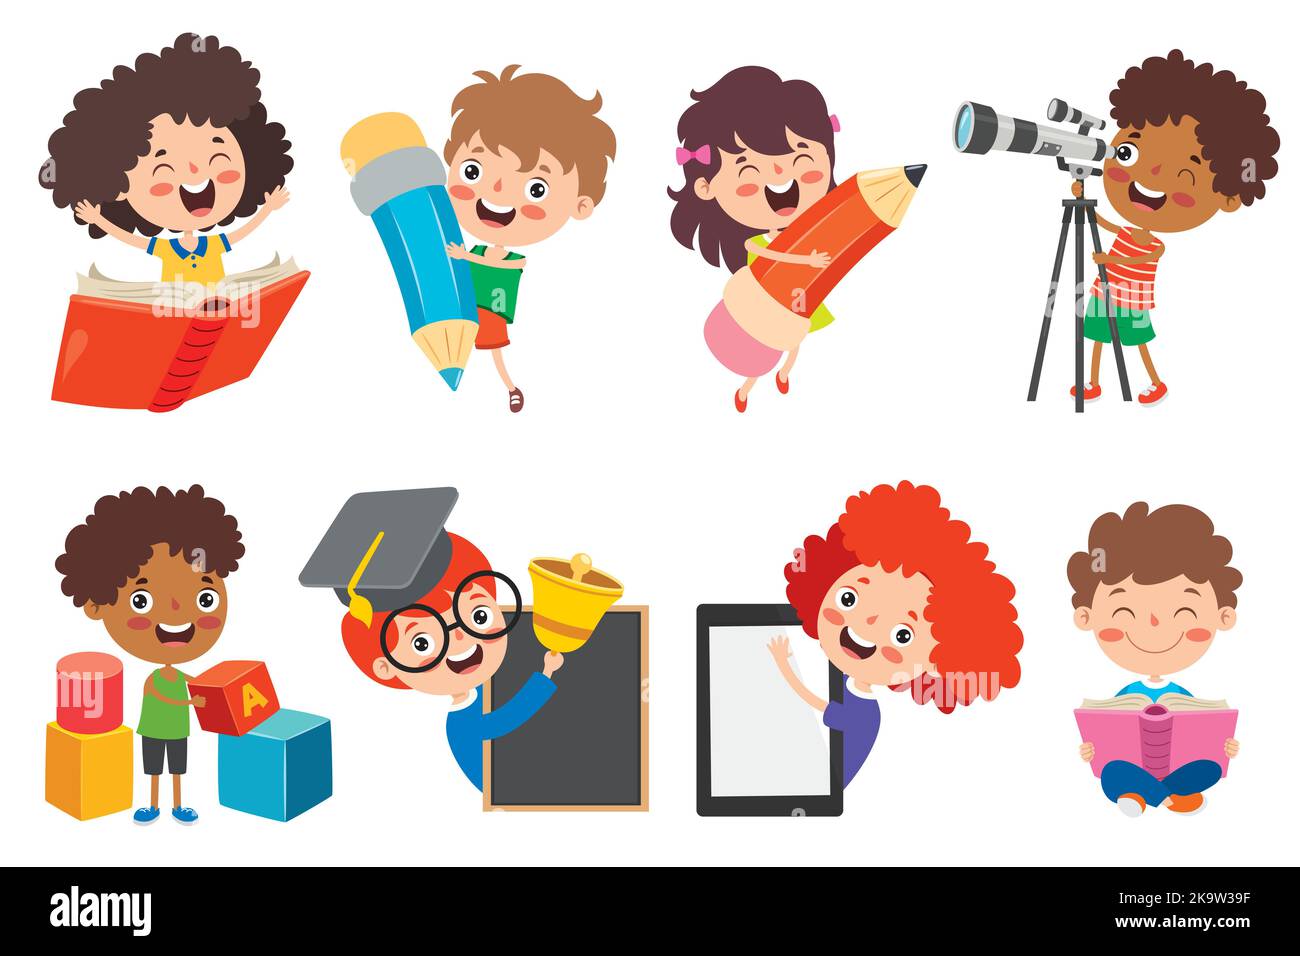 Education Concept With Cartoon Student Stock Vector